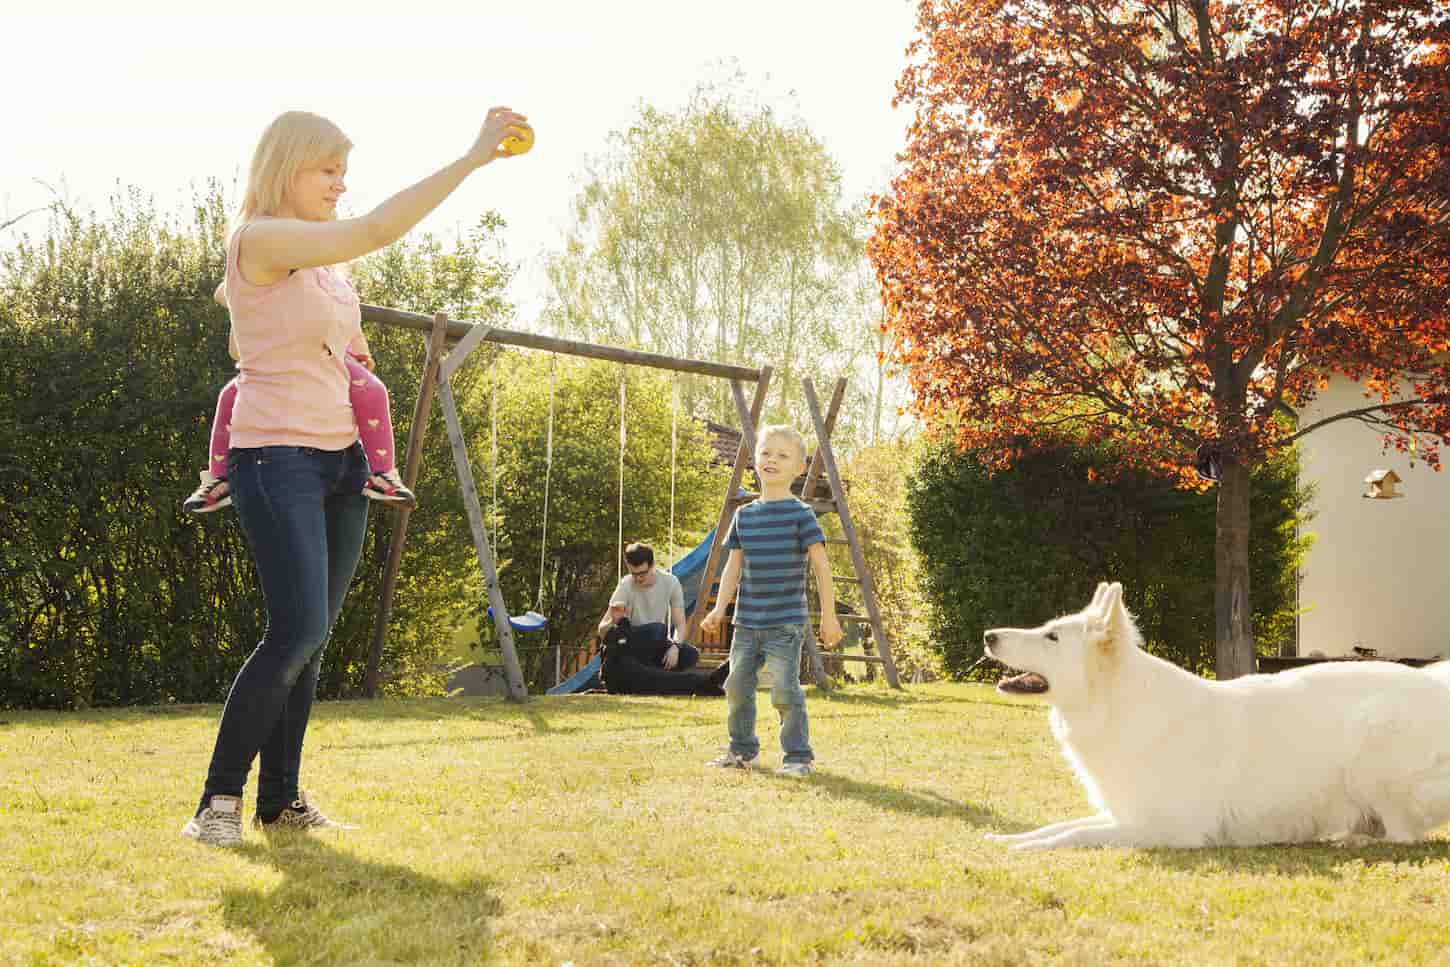 An image of a Family hanging out in the garden and training the dog.